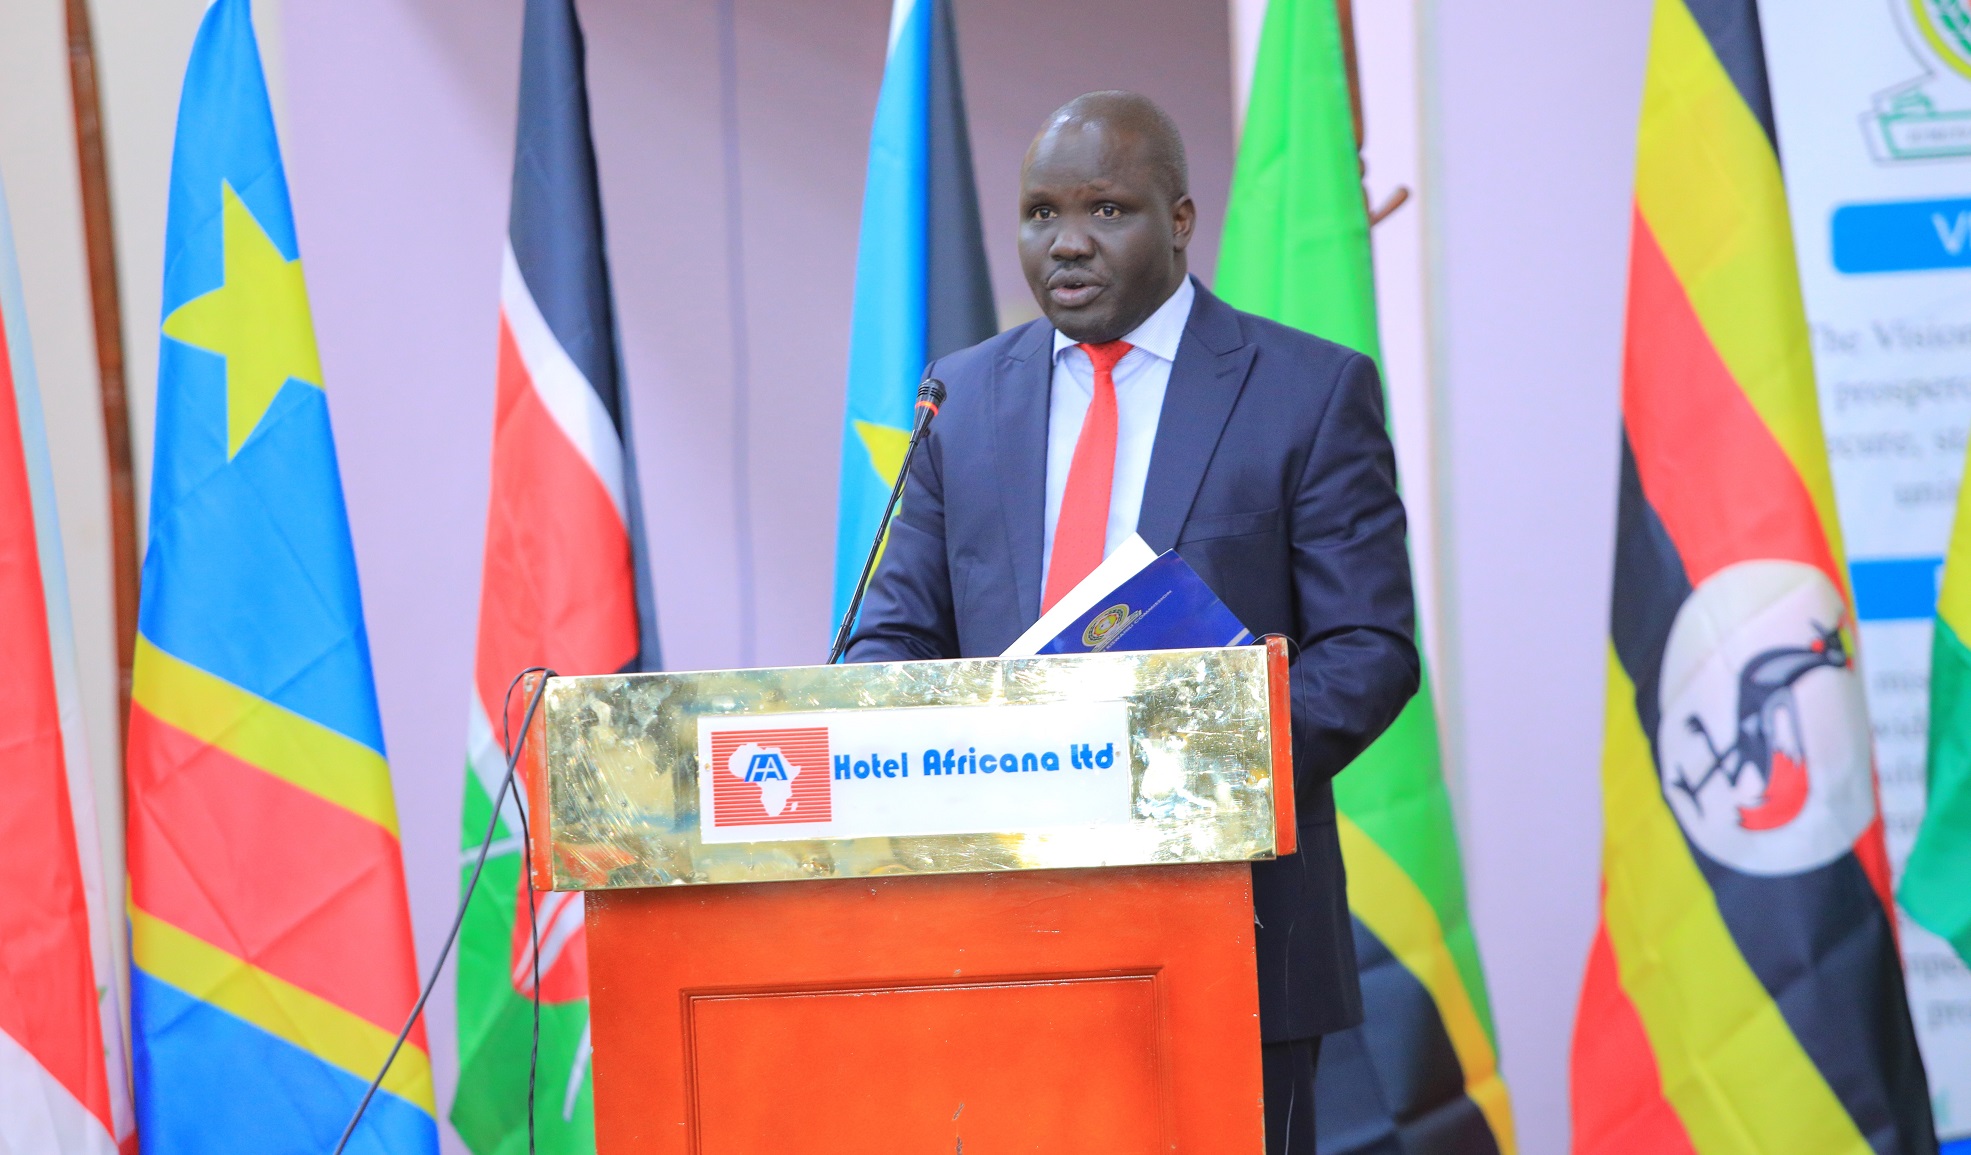 The EAC Deputy Secretary in charge of Infrastructure, Productive, Social and Political Sectors, Hon. Andrea Aguer Ariik Malueth, speaks during the 2nd EAC World Kiswahili Day celebrations in Kampala. Hon. Malueth represented the EAC Secretary General, Hon. (Dr.) Peter Mutuki Mathuki.